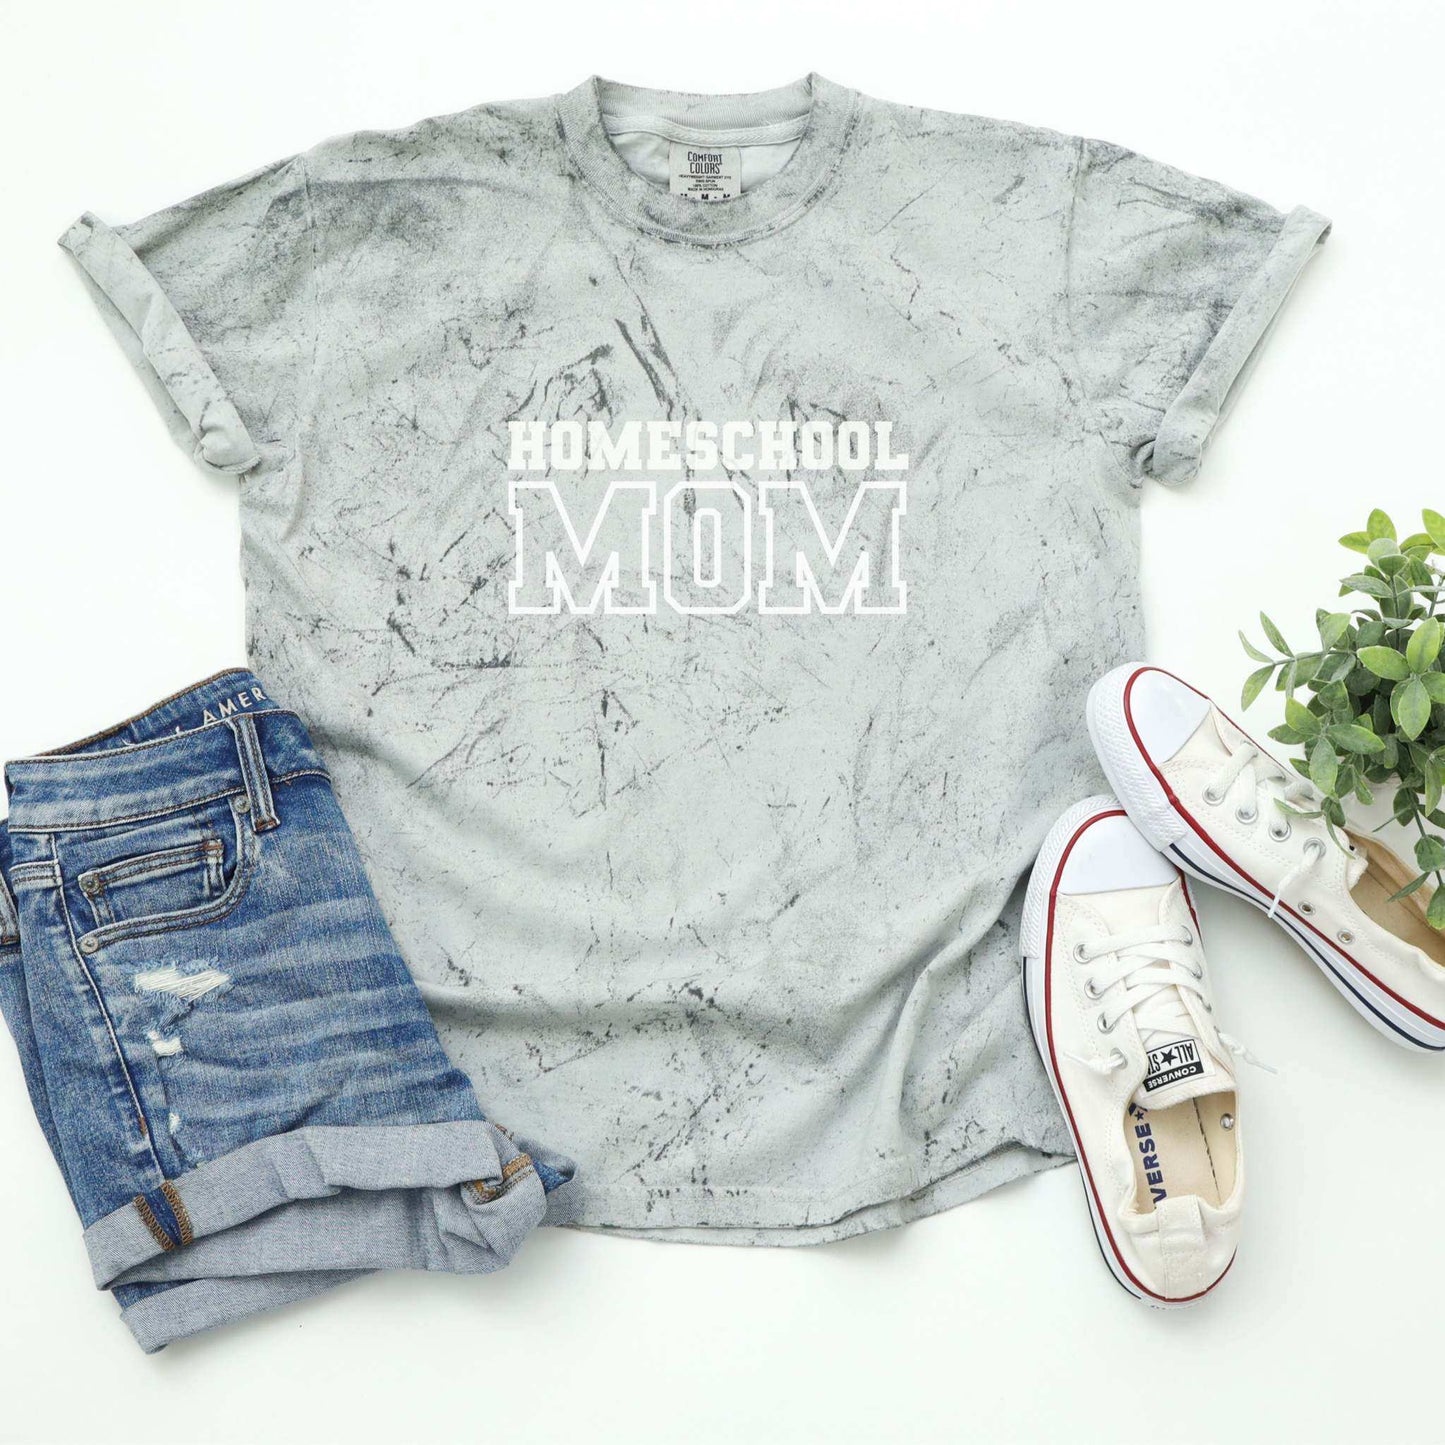 Homeschool Mom Color Blast ShirtWolfe Paw DesignsHomeschool Mom Color Blast Shirt*See Pictures for sizing
Homeschool Mom: Sporty style 
Comfort Colors Unisex
Made 100% with incredibly soft, ring-spun cotton, each tee is soft-washed and garment-dyHomeschool Mom Color Blast T-Shirt